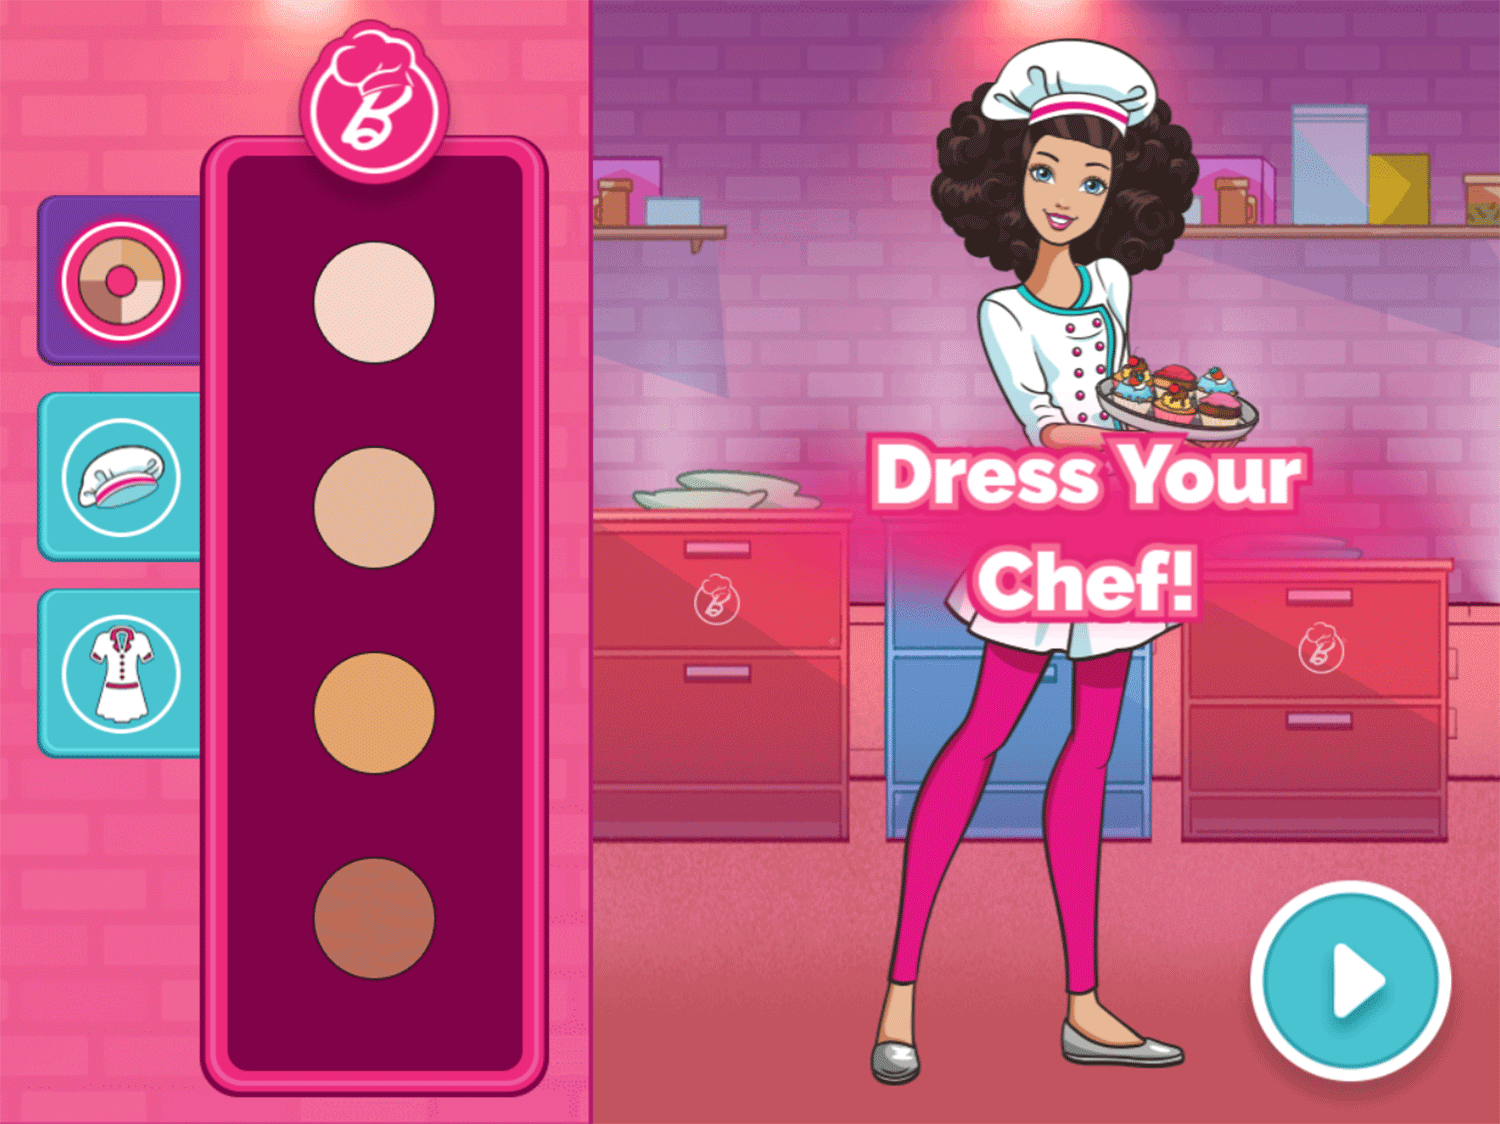 Barbie You Can Be a Chef Game Dress Your Chef Screenshot.